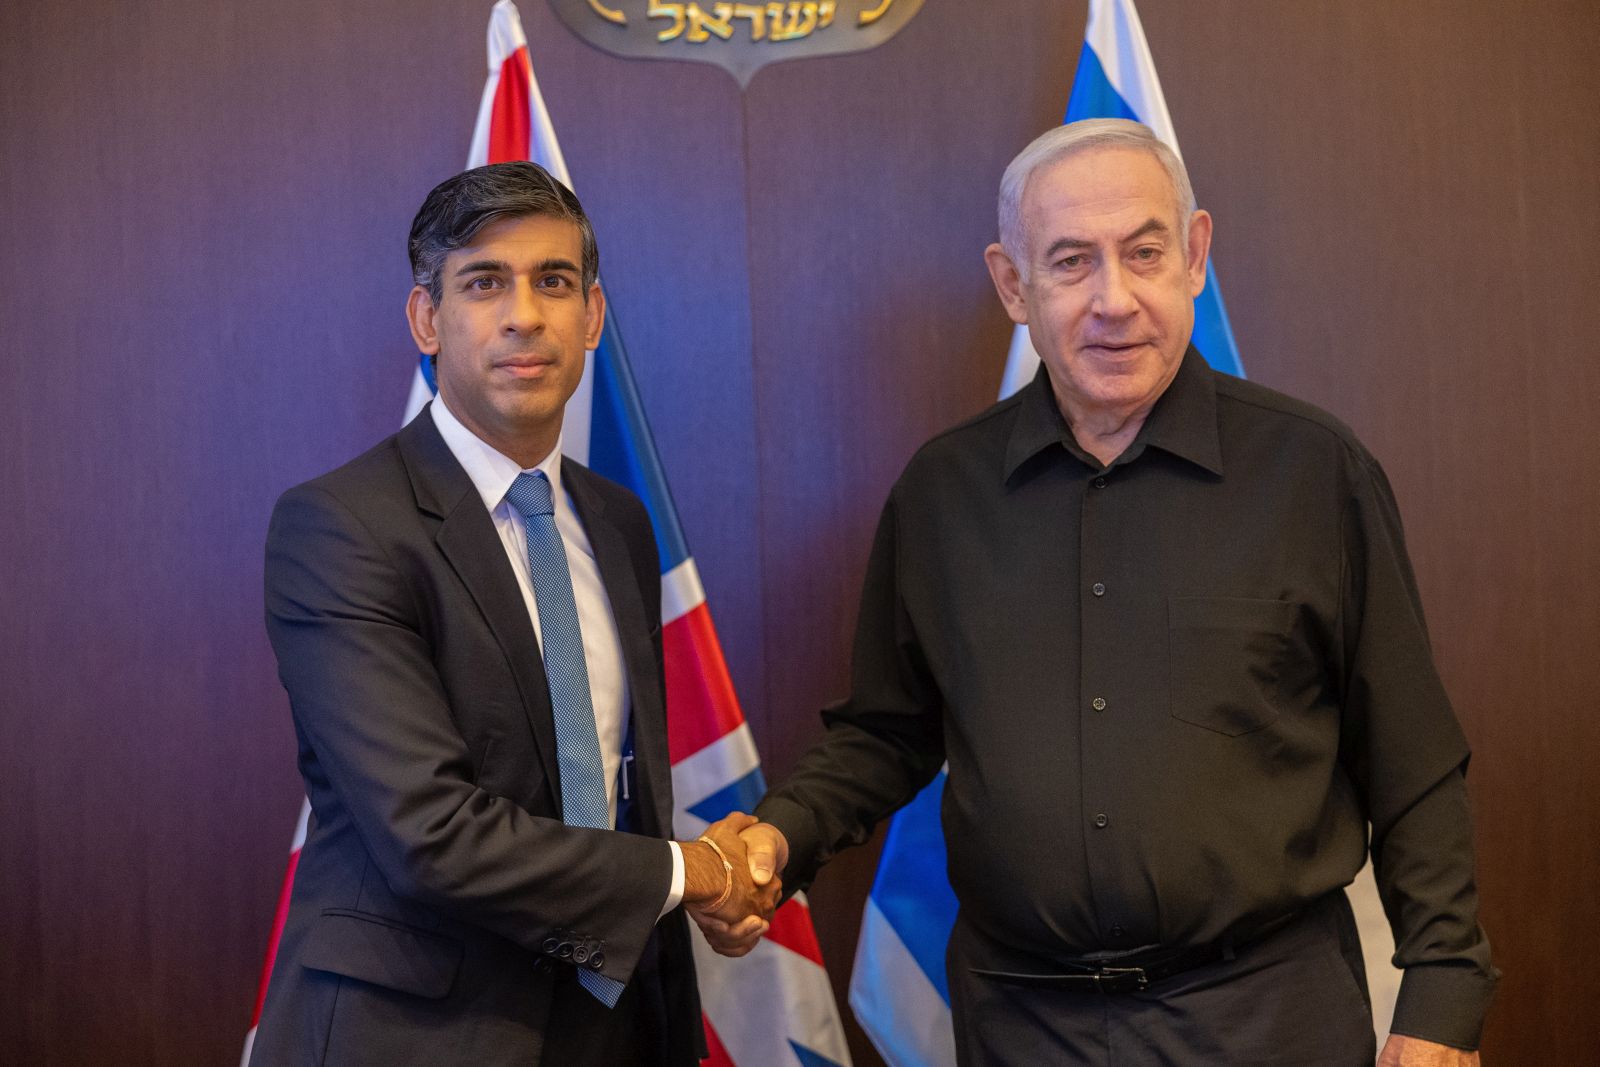 epa10926949 A handout photo made available by Number 10 Downing Street shows British Prime Minister Rishi Sunak (L) meeting Israeli Prime Minister Benjamin Netanyahu (R) in Jerusalem, 19 October 2023. More than 3,400 Palestinians and 1,400 Israelis have been killed according to the Israel Defense Forces (IDF) and the Palestinian Health authority since Hamas militants launched an attack against Israel from the Gaza Strip on 07 October. Israel has warned all citizens of the Gaza Strip to move to the south ahead of an expected invasion.  EPA/Simon Walker / No 10 Downing Street HANDOUT  HANDOUT EDITORIAL USE ONLY/NO SALES HANDOUT EDITORIAL USE ONLY/NO SALES